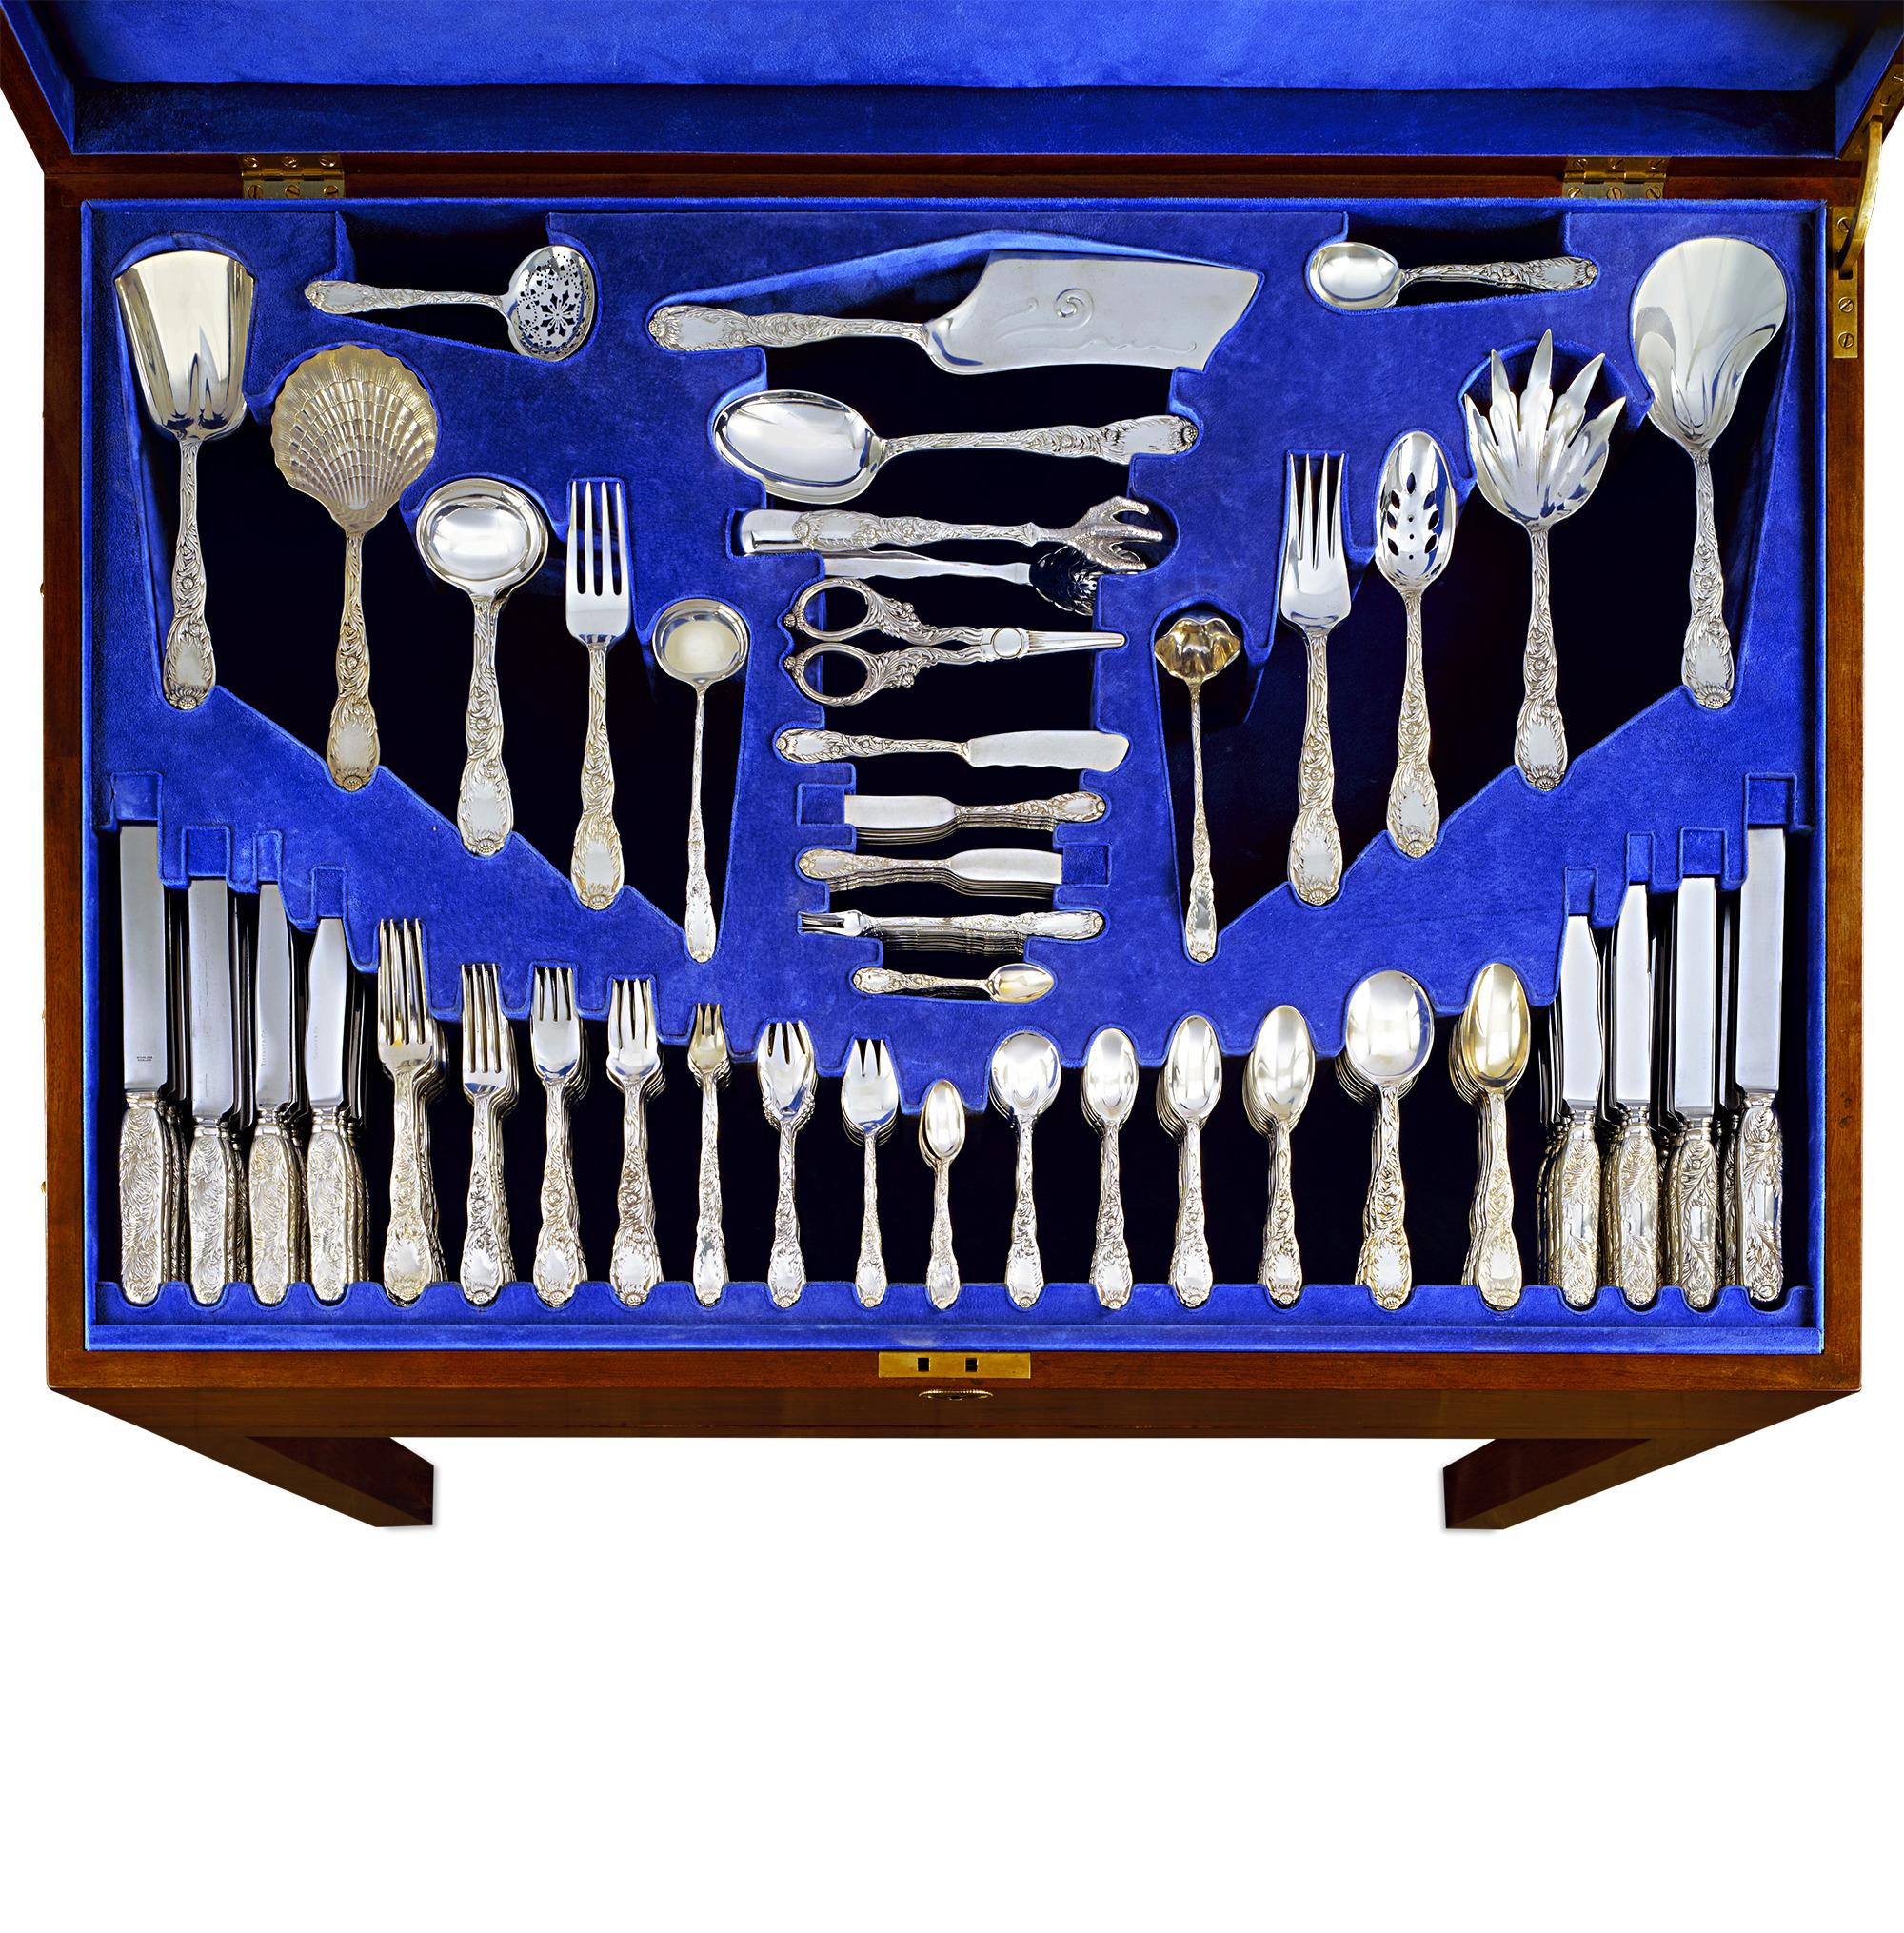 This exceptional 272-piece antique Tiffany & Co. sterling flatware service for 12 features the highly desirable Chrysanthemum pattern. Introduced in 1878 and patented in 1880, the Chrysanthemum pattern is considered among Tiffany's most beautiful